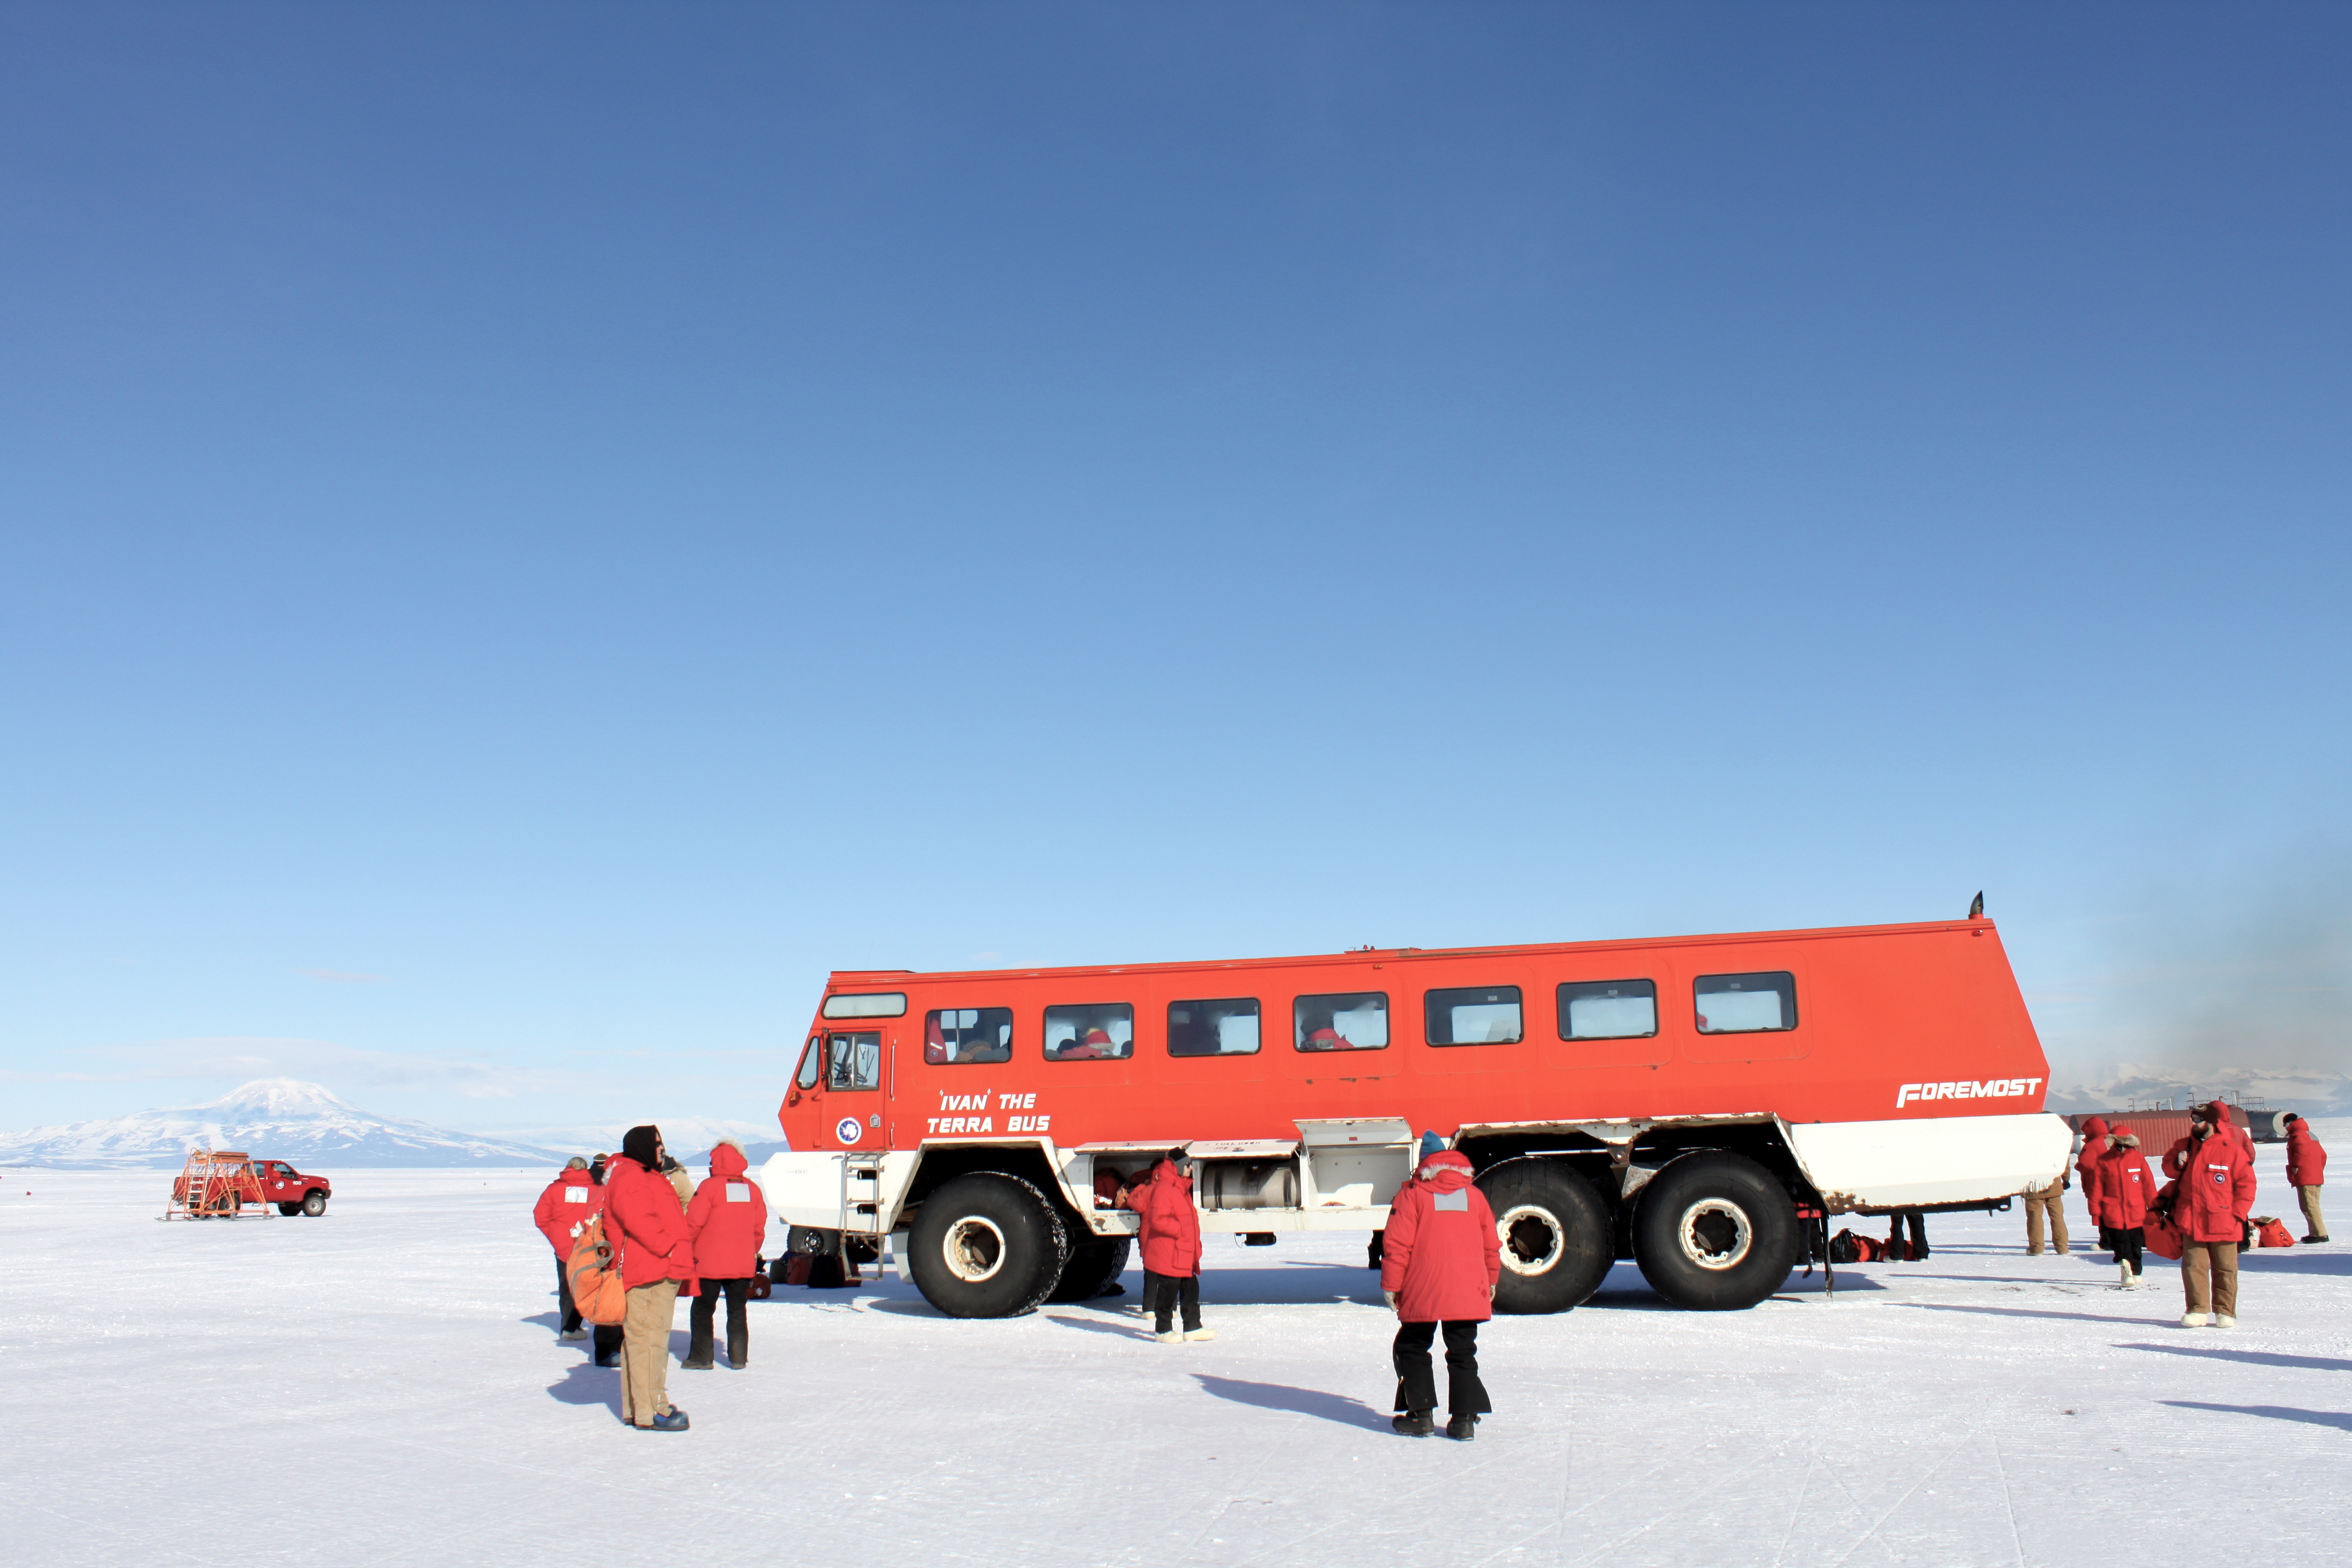 An image of Ivan the Terra Bus in Antarctica. Blue sky, white snow, and a few people standing around in red coats.